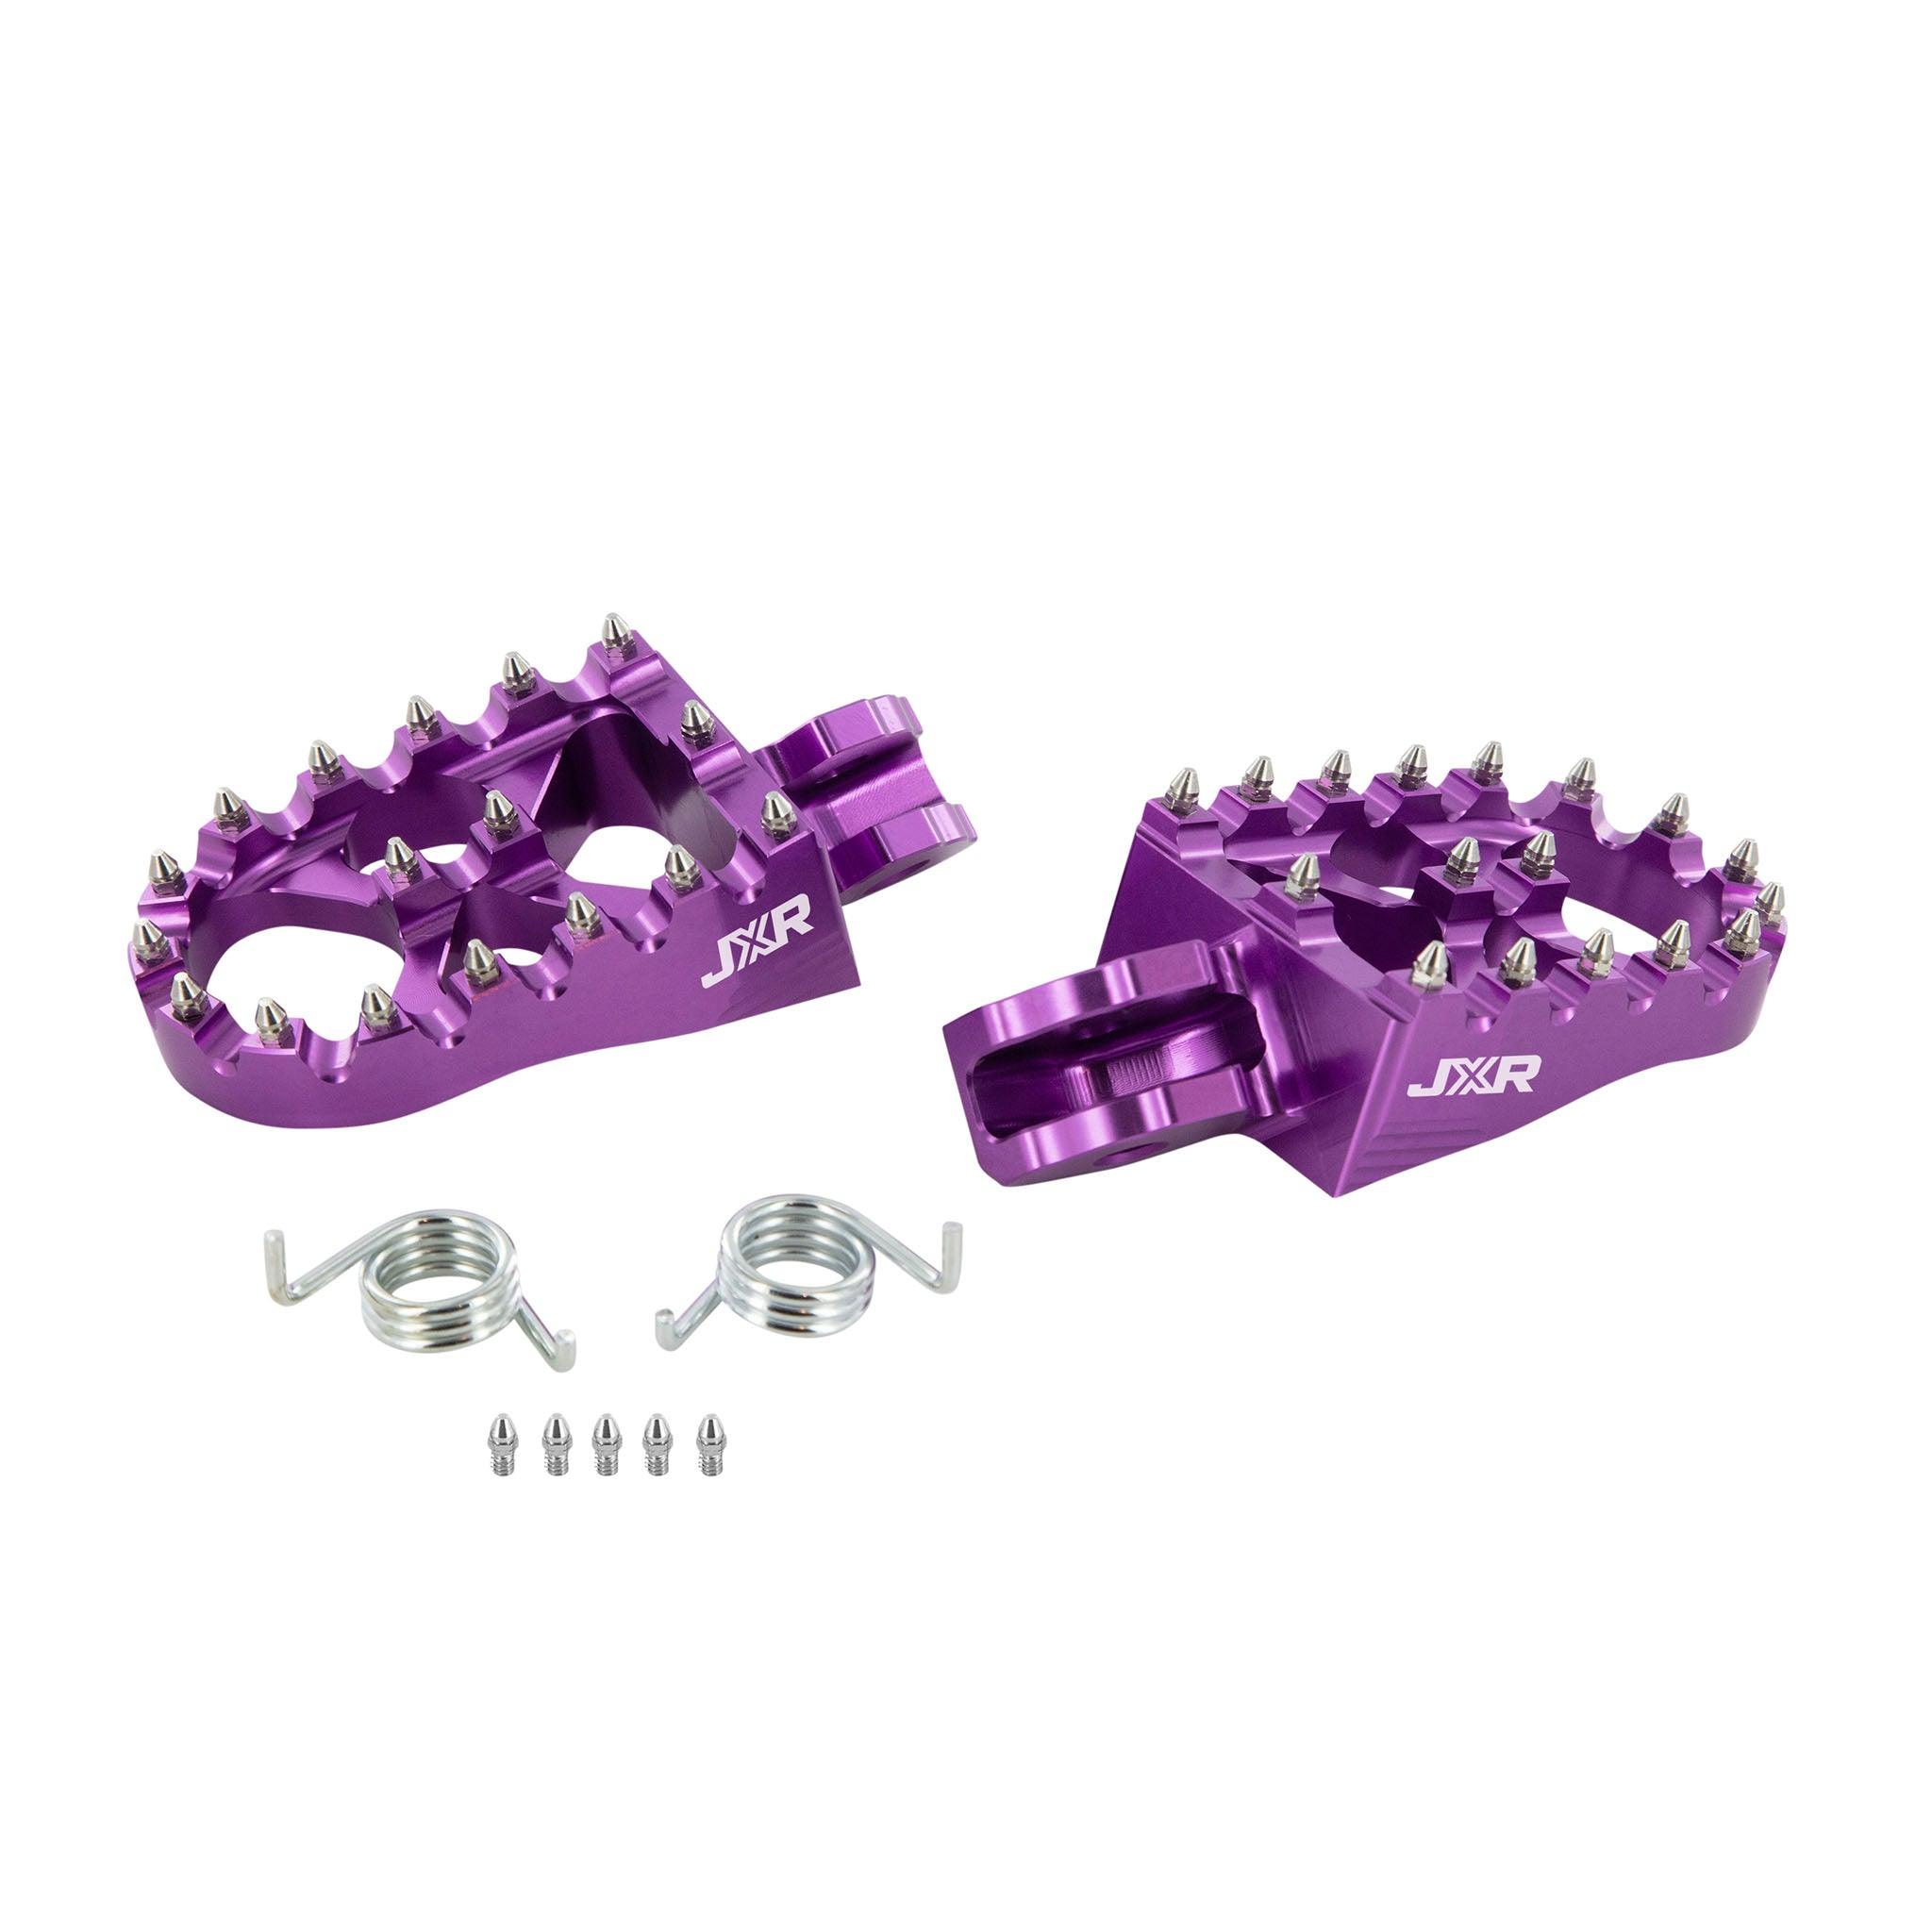 Footpegs for Surron Light Bee anodized purple